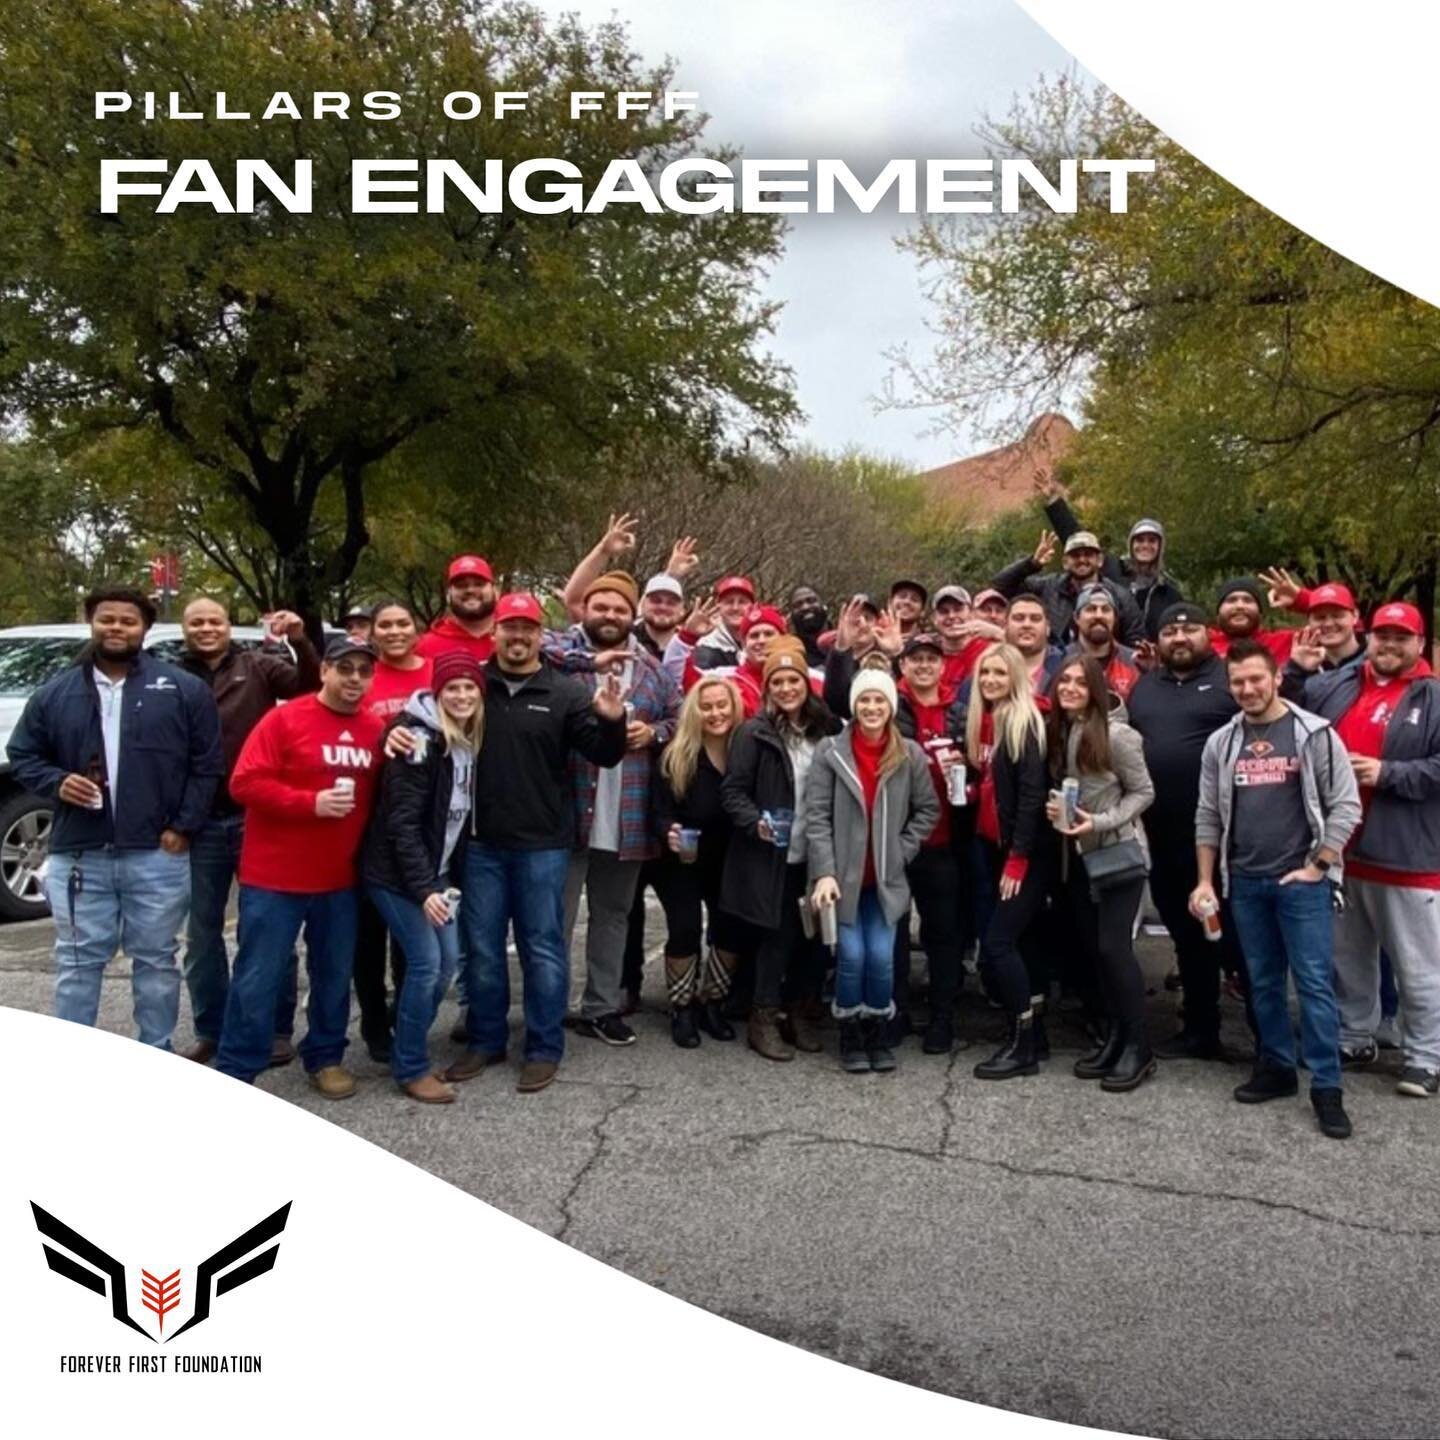 The core mission of the Forever First Foundation is to unite ALL SUPPORTERS of UIW football so that we can provide unrivaled support for the football program. This is done through our Foundation&rsquo;s three pillars: 1.) Fundraising 2.) Fan Engageme